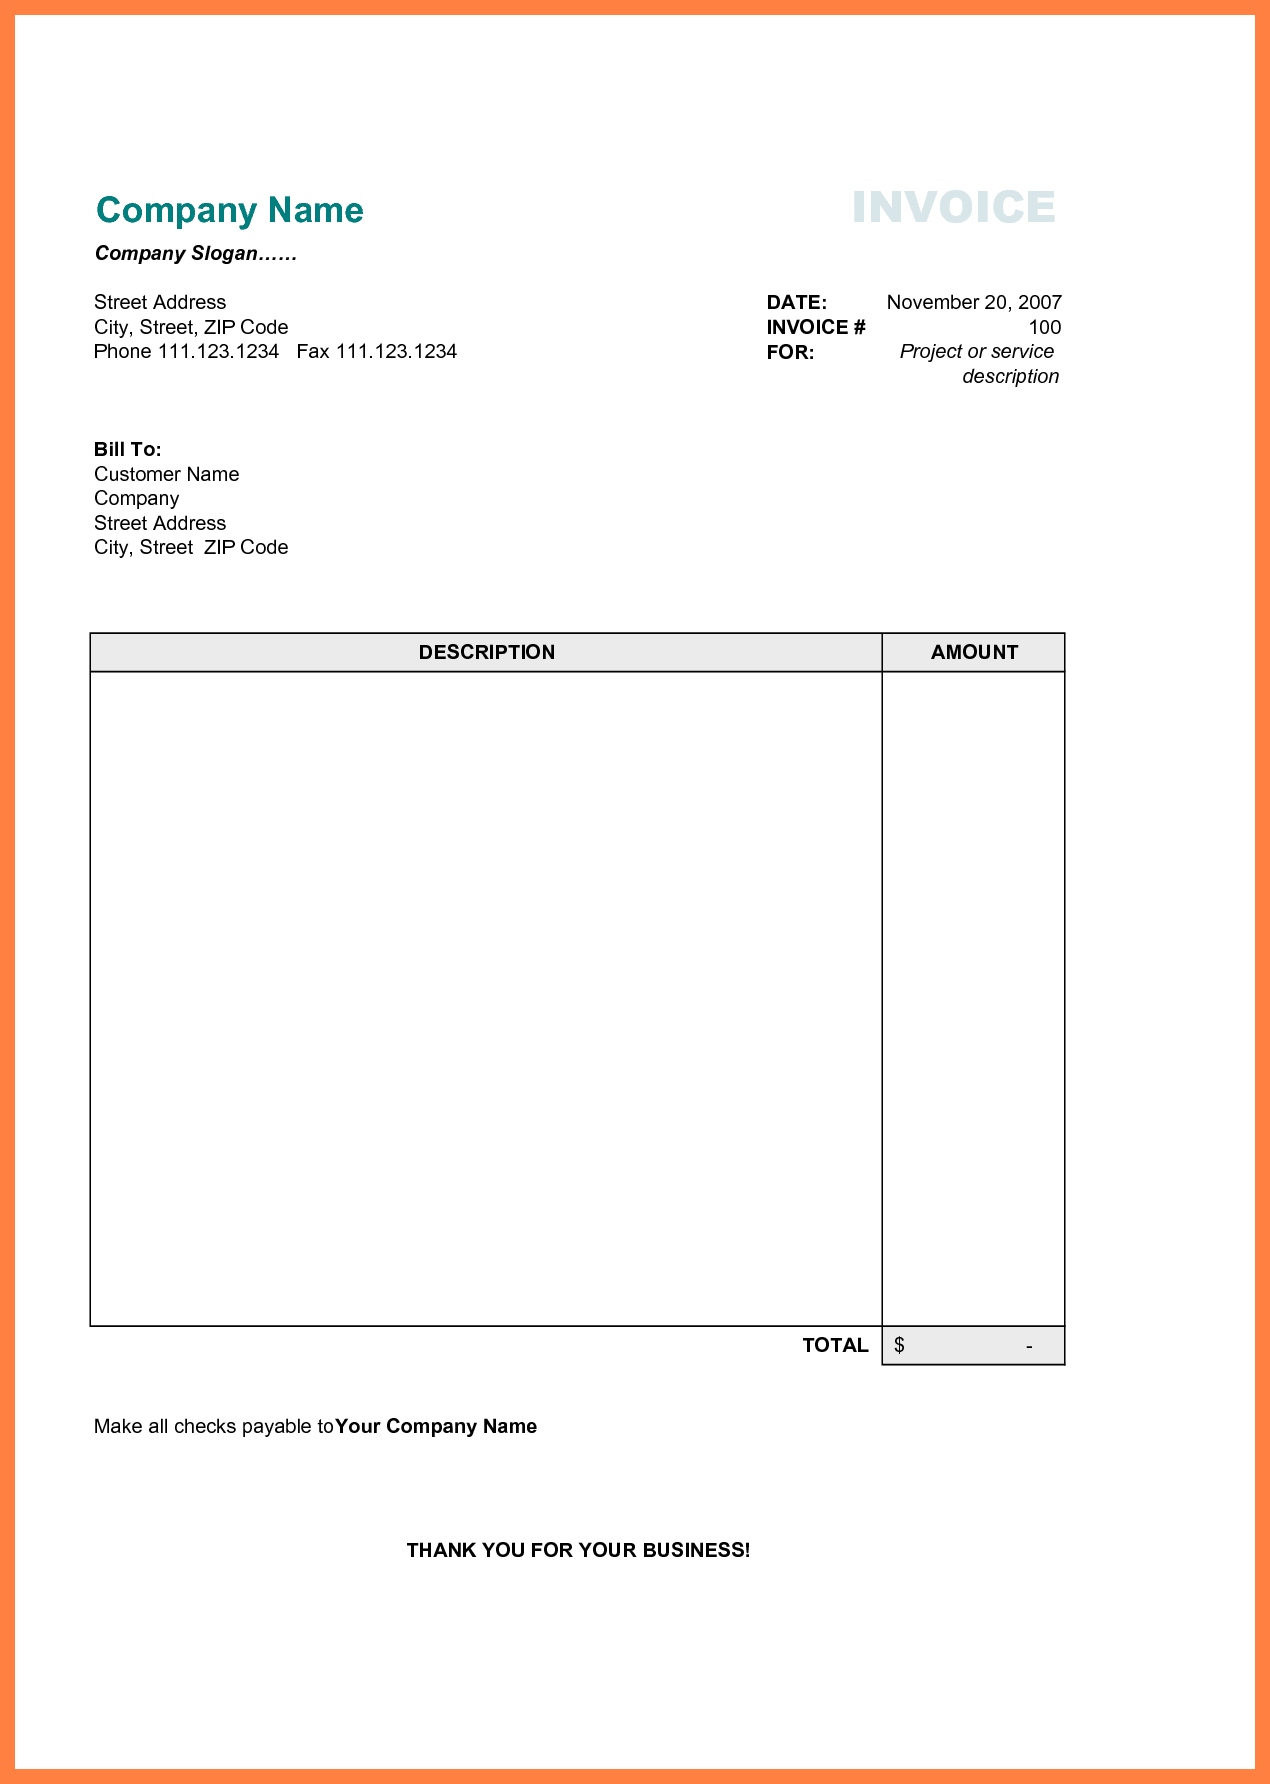 Free Printable Business Invoice Template - Invoice Format In Excel - Invoice Templates Printable Free Word Doc